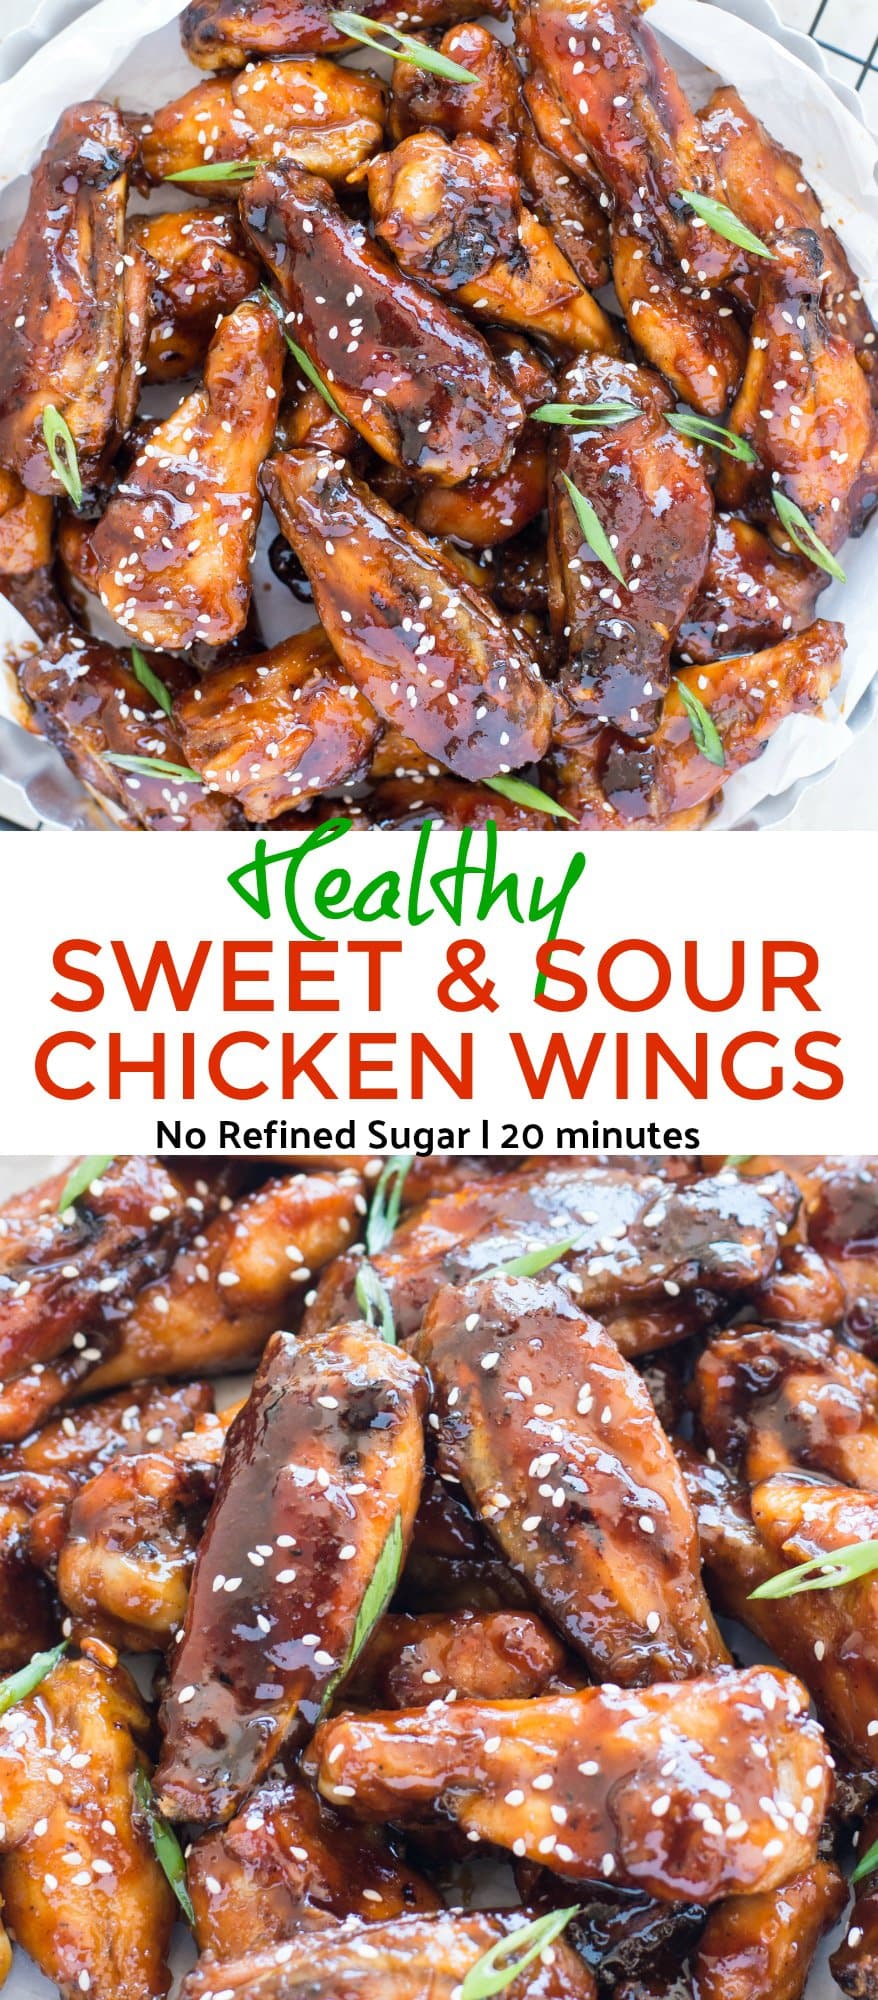 Healthy Sweet and Sour Chicken Wings